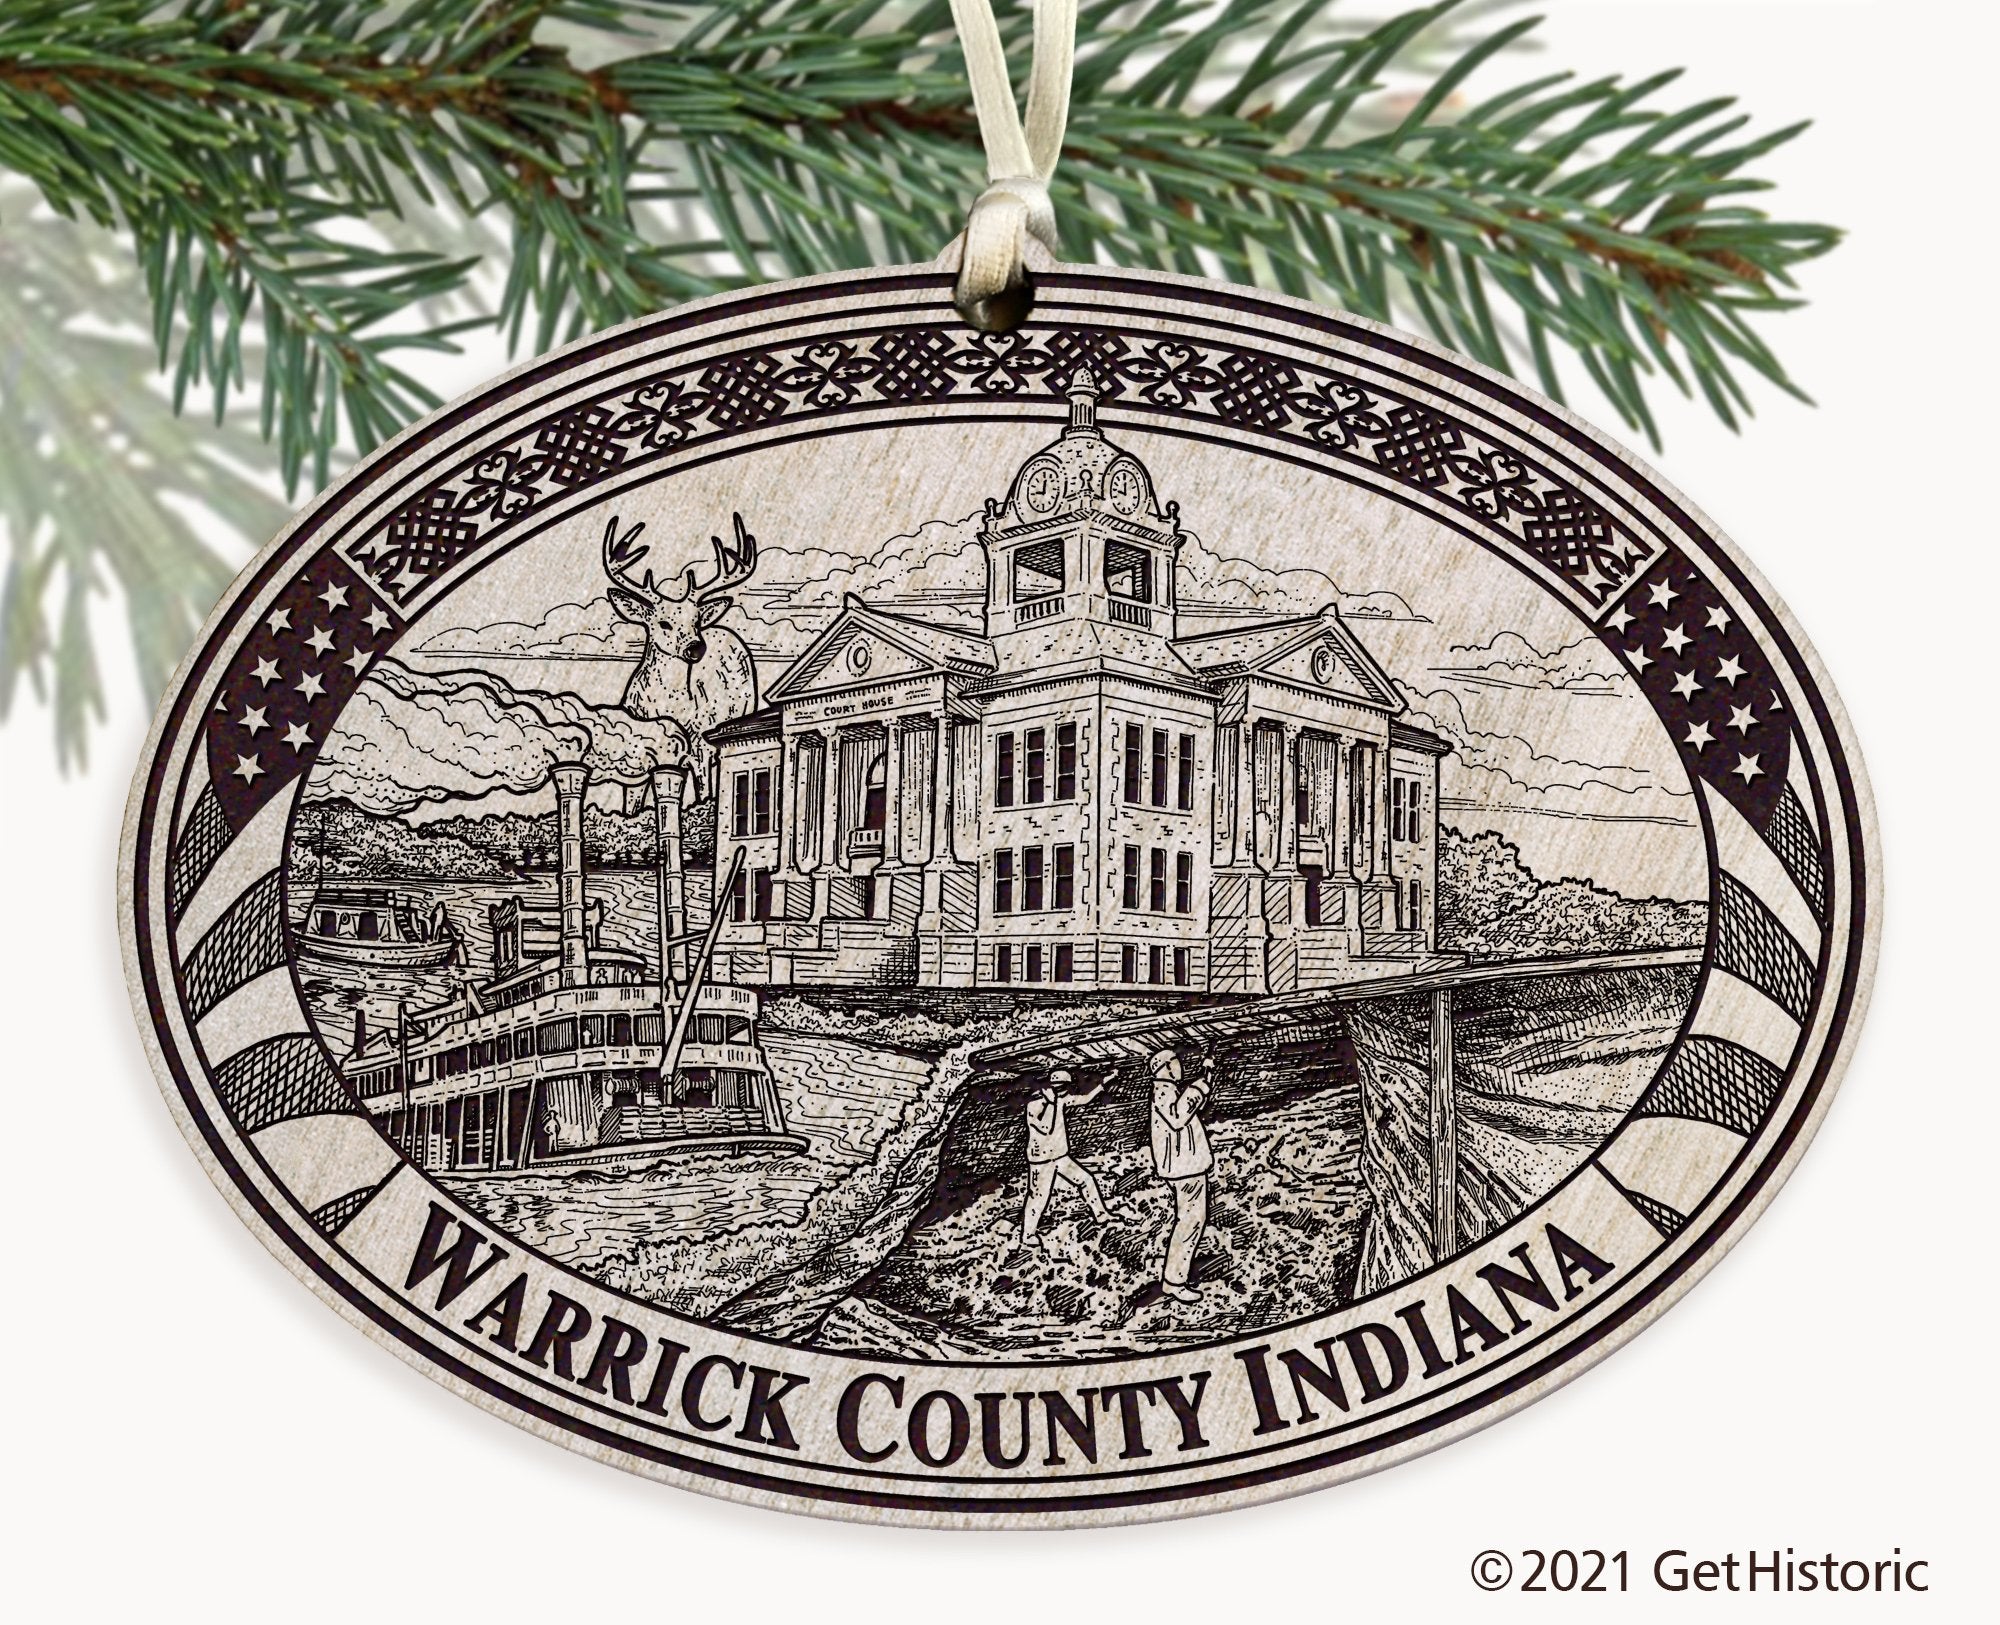 Warrick County Indiana Engraved Ornament